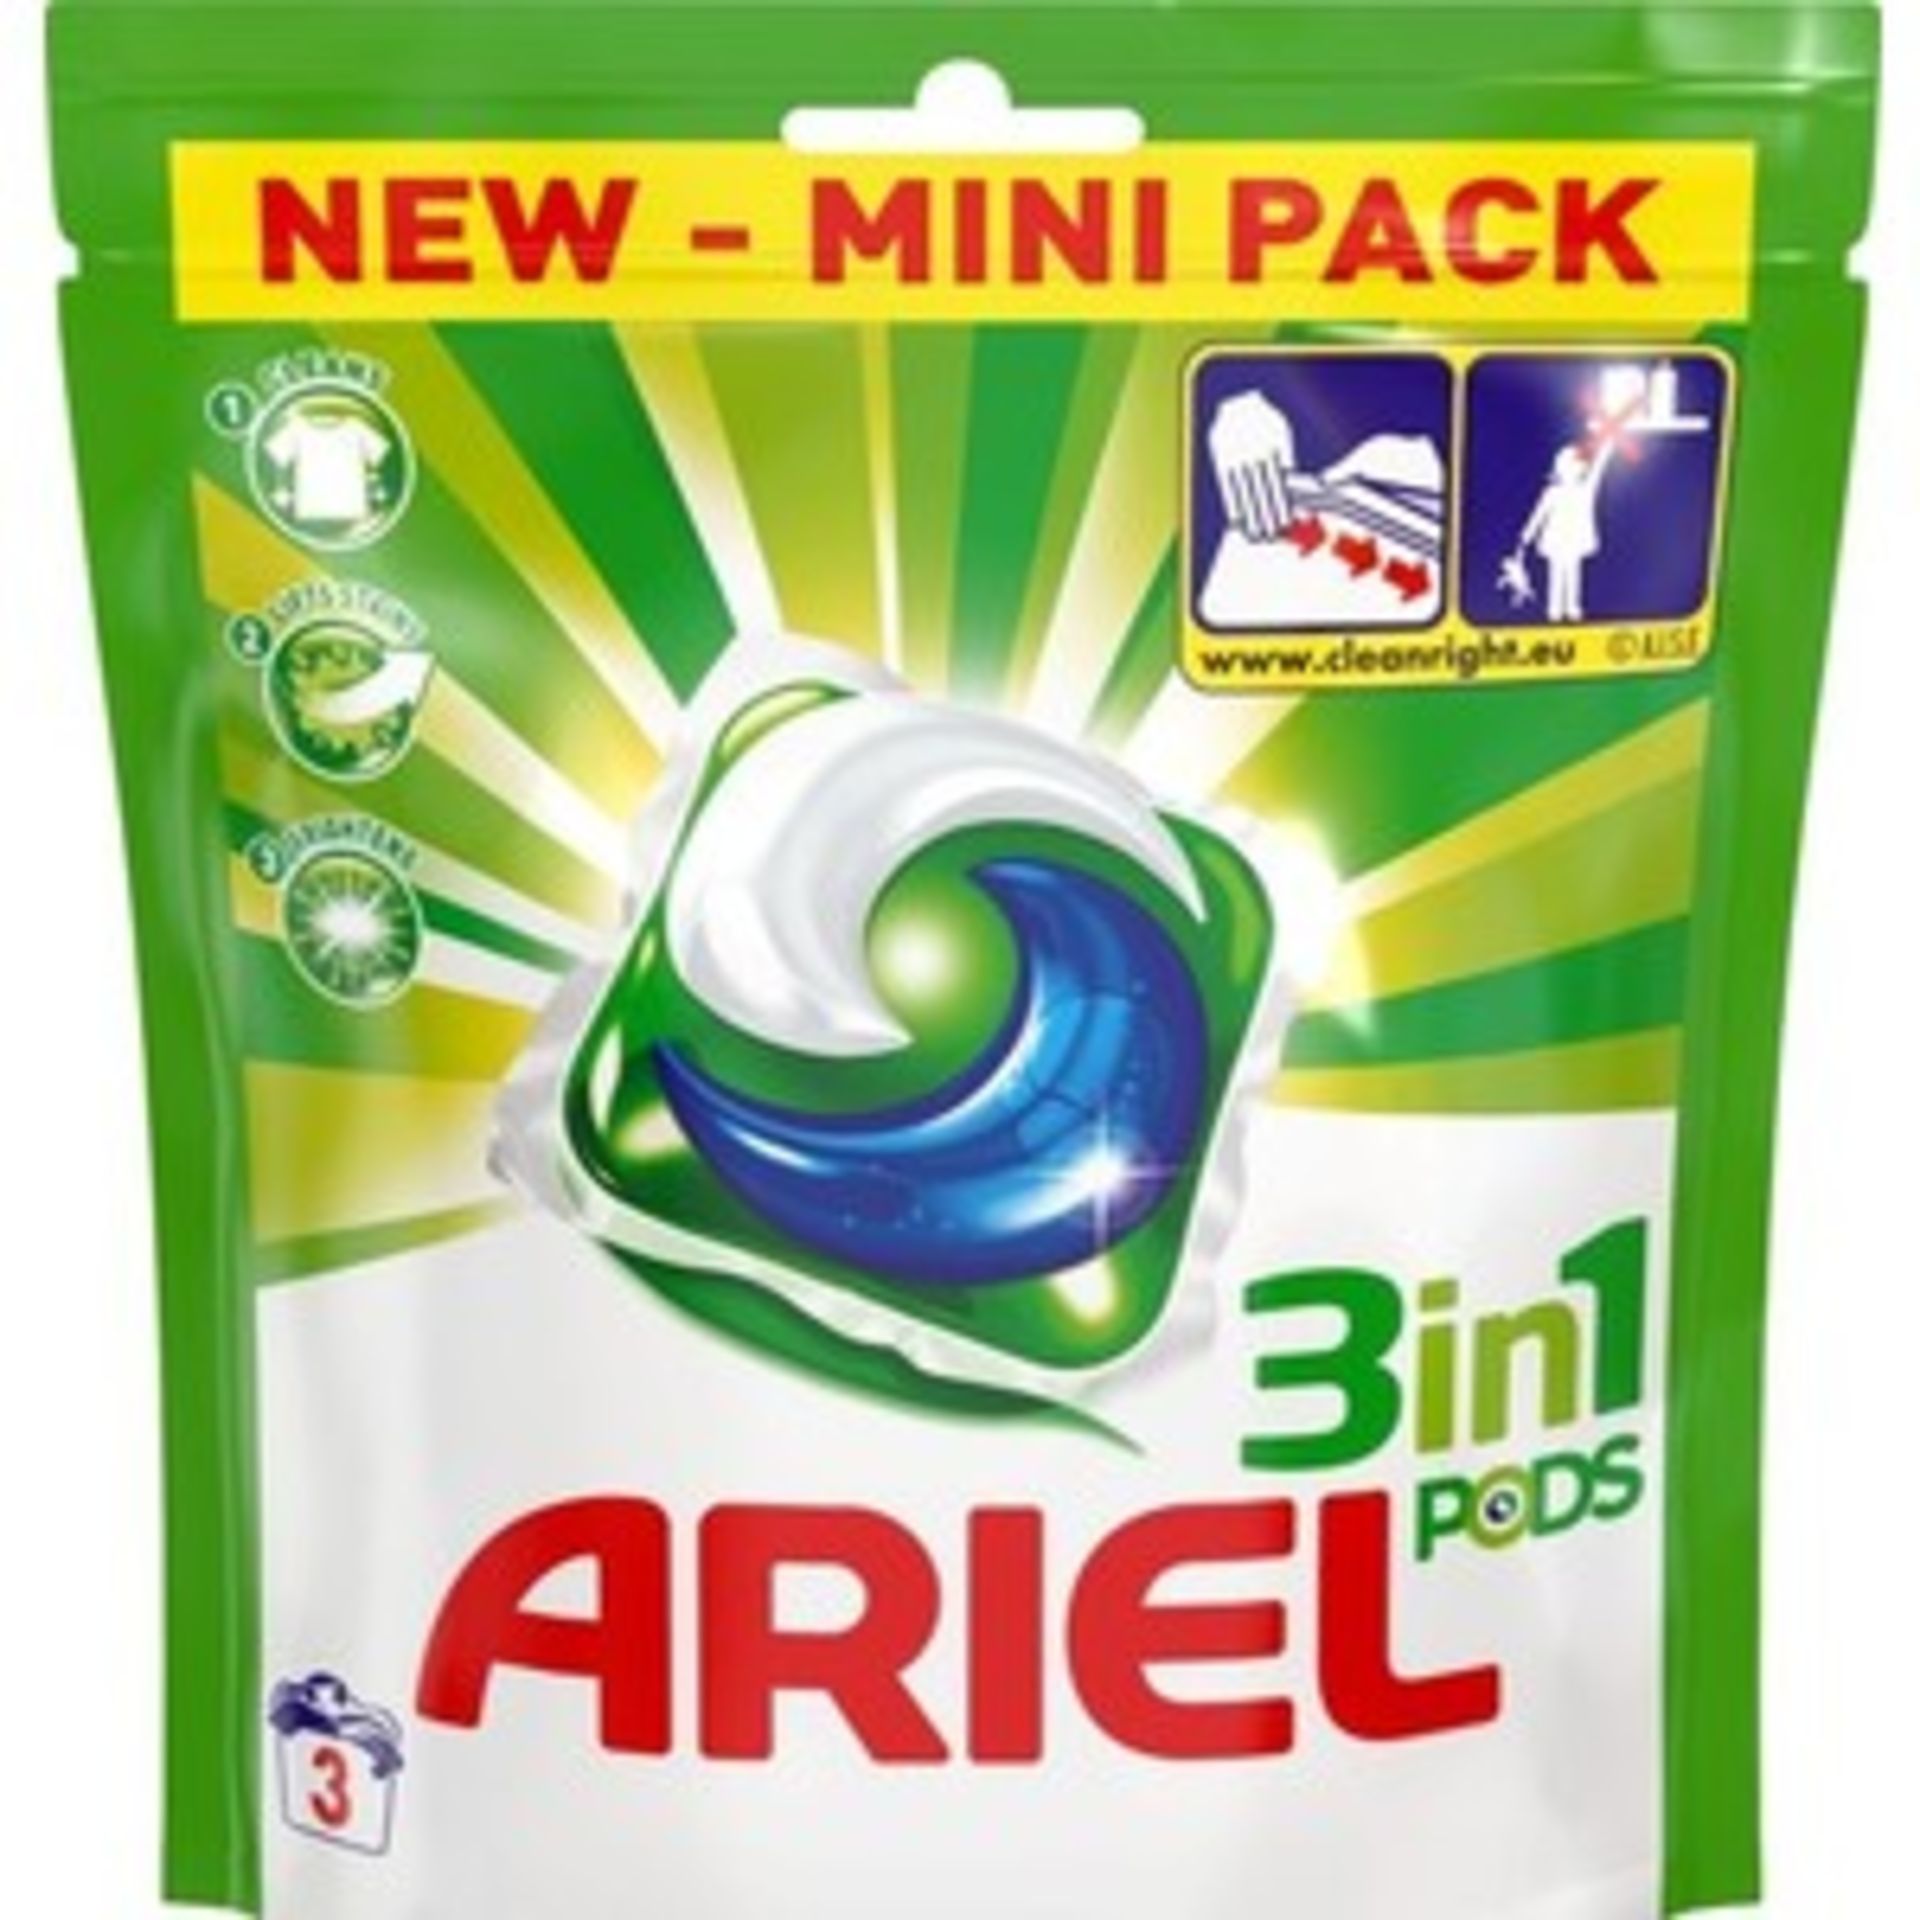 V *TRADE QTY* Brand New 12 Ariel 3-in-1 Pods Laundry Detergent X 3 YOUR BID PRICE TO BE MULTIPLIED